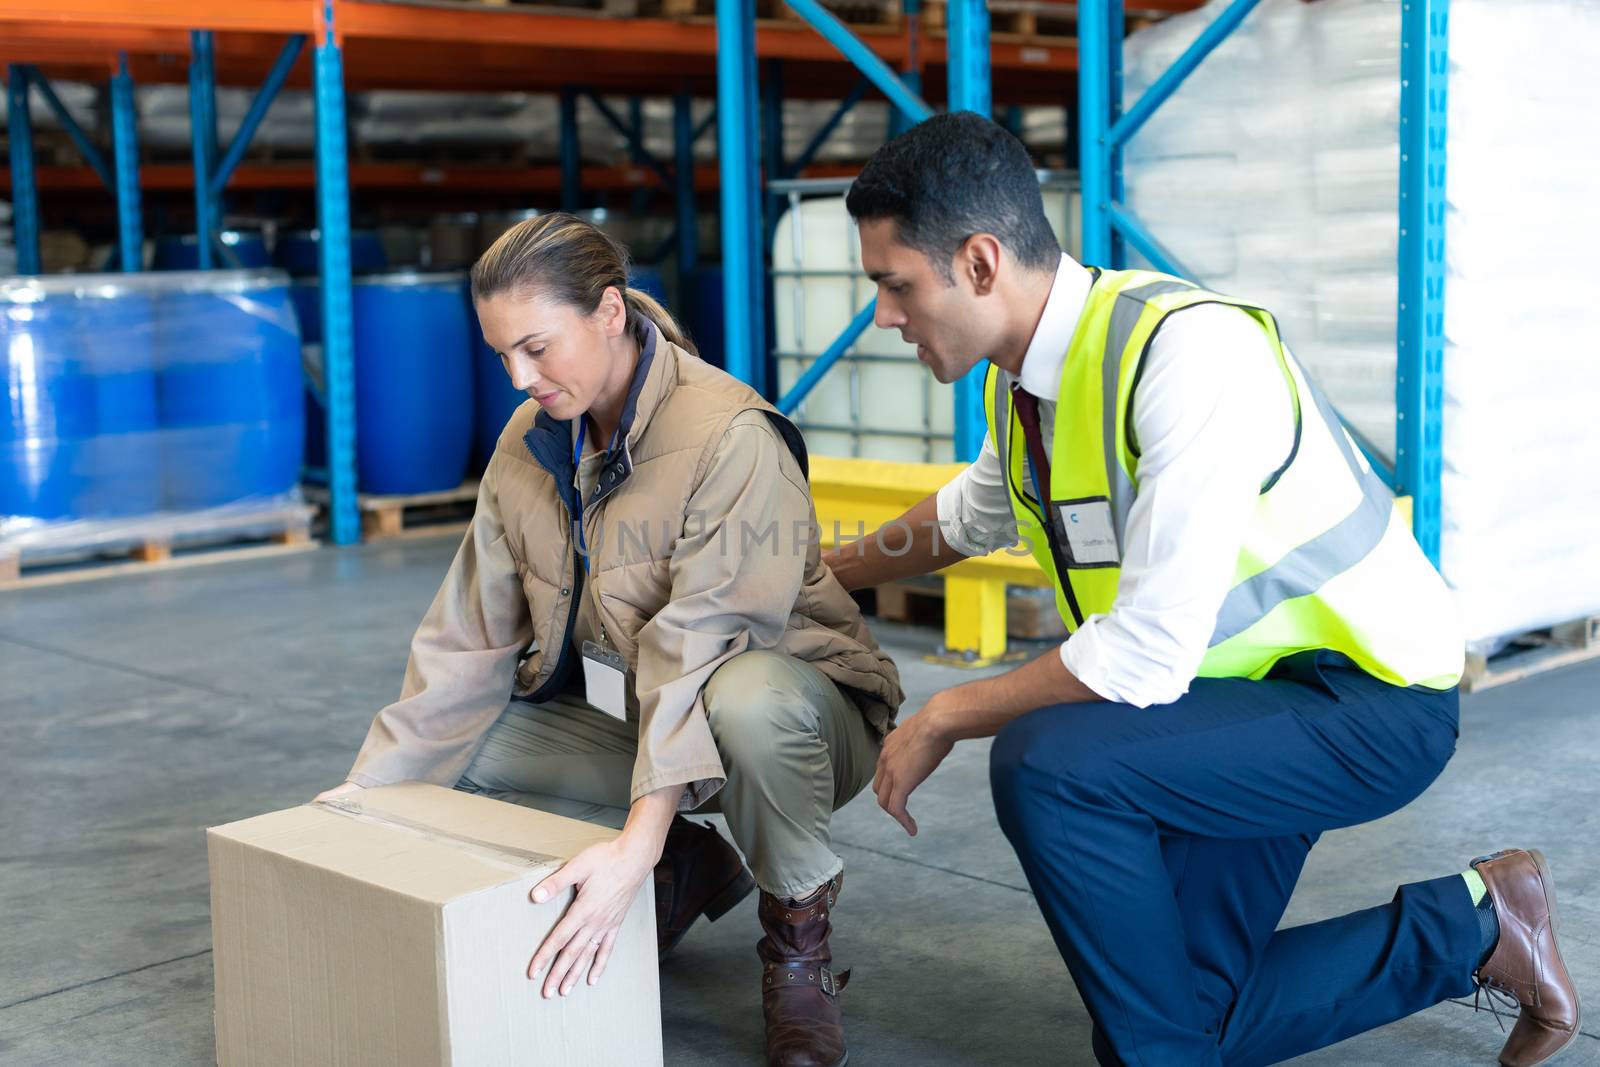 Side view of Young Caucasian male staff giving training to female staff in warehouse. This is a freight transportation and distribution warehouse. Industrial and industrial workers concept